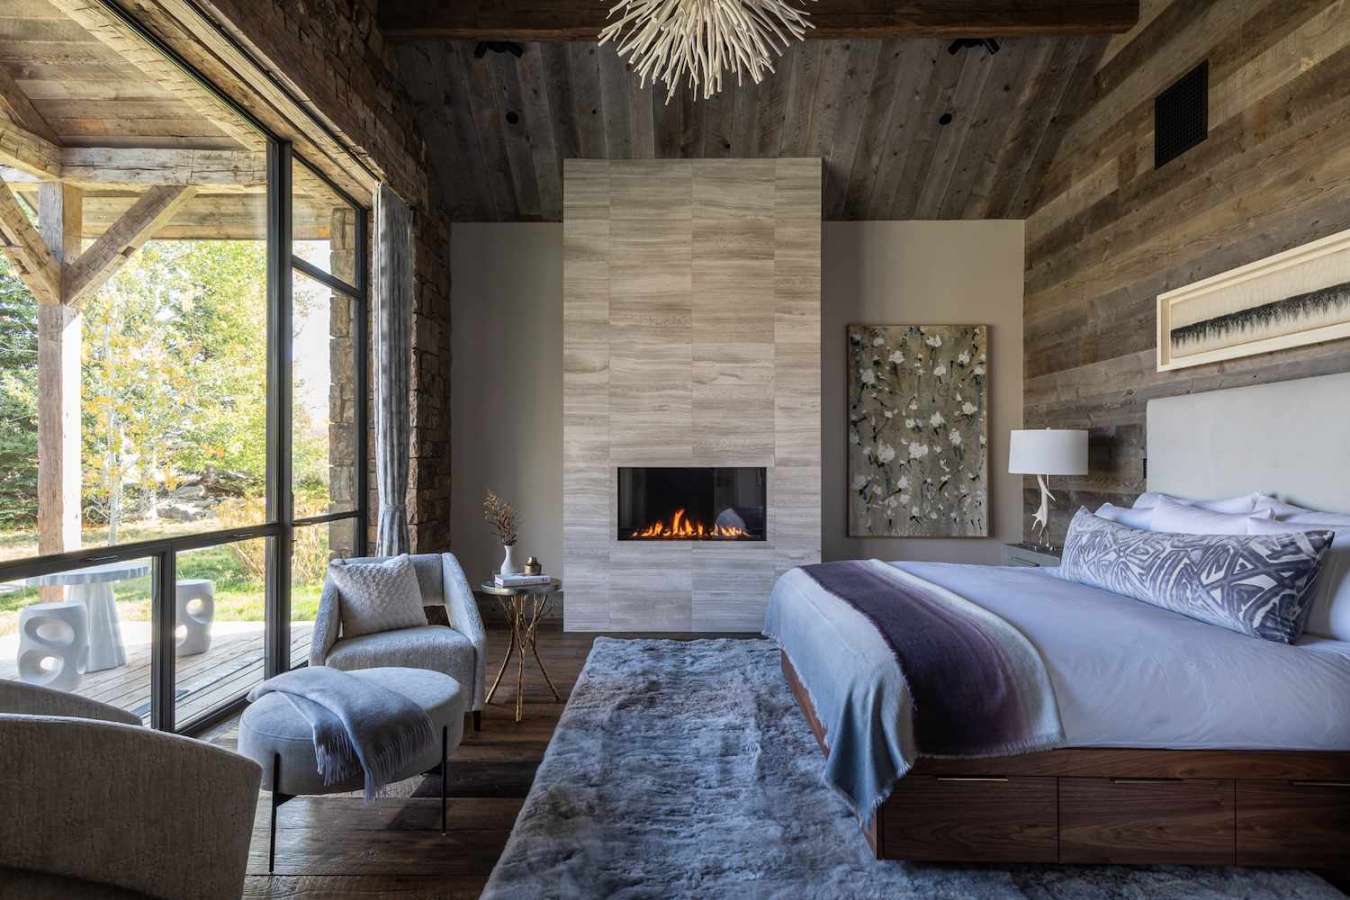 Bedroom Fireplace Ideas to Light Up Your Life